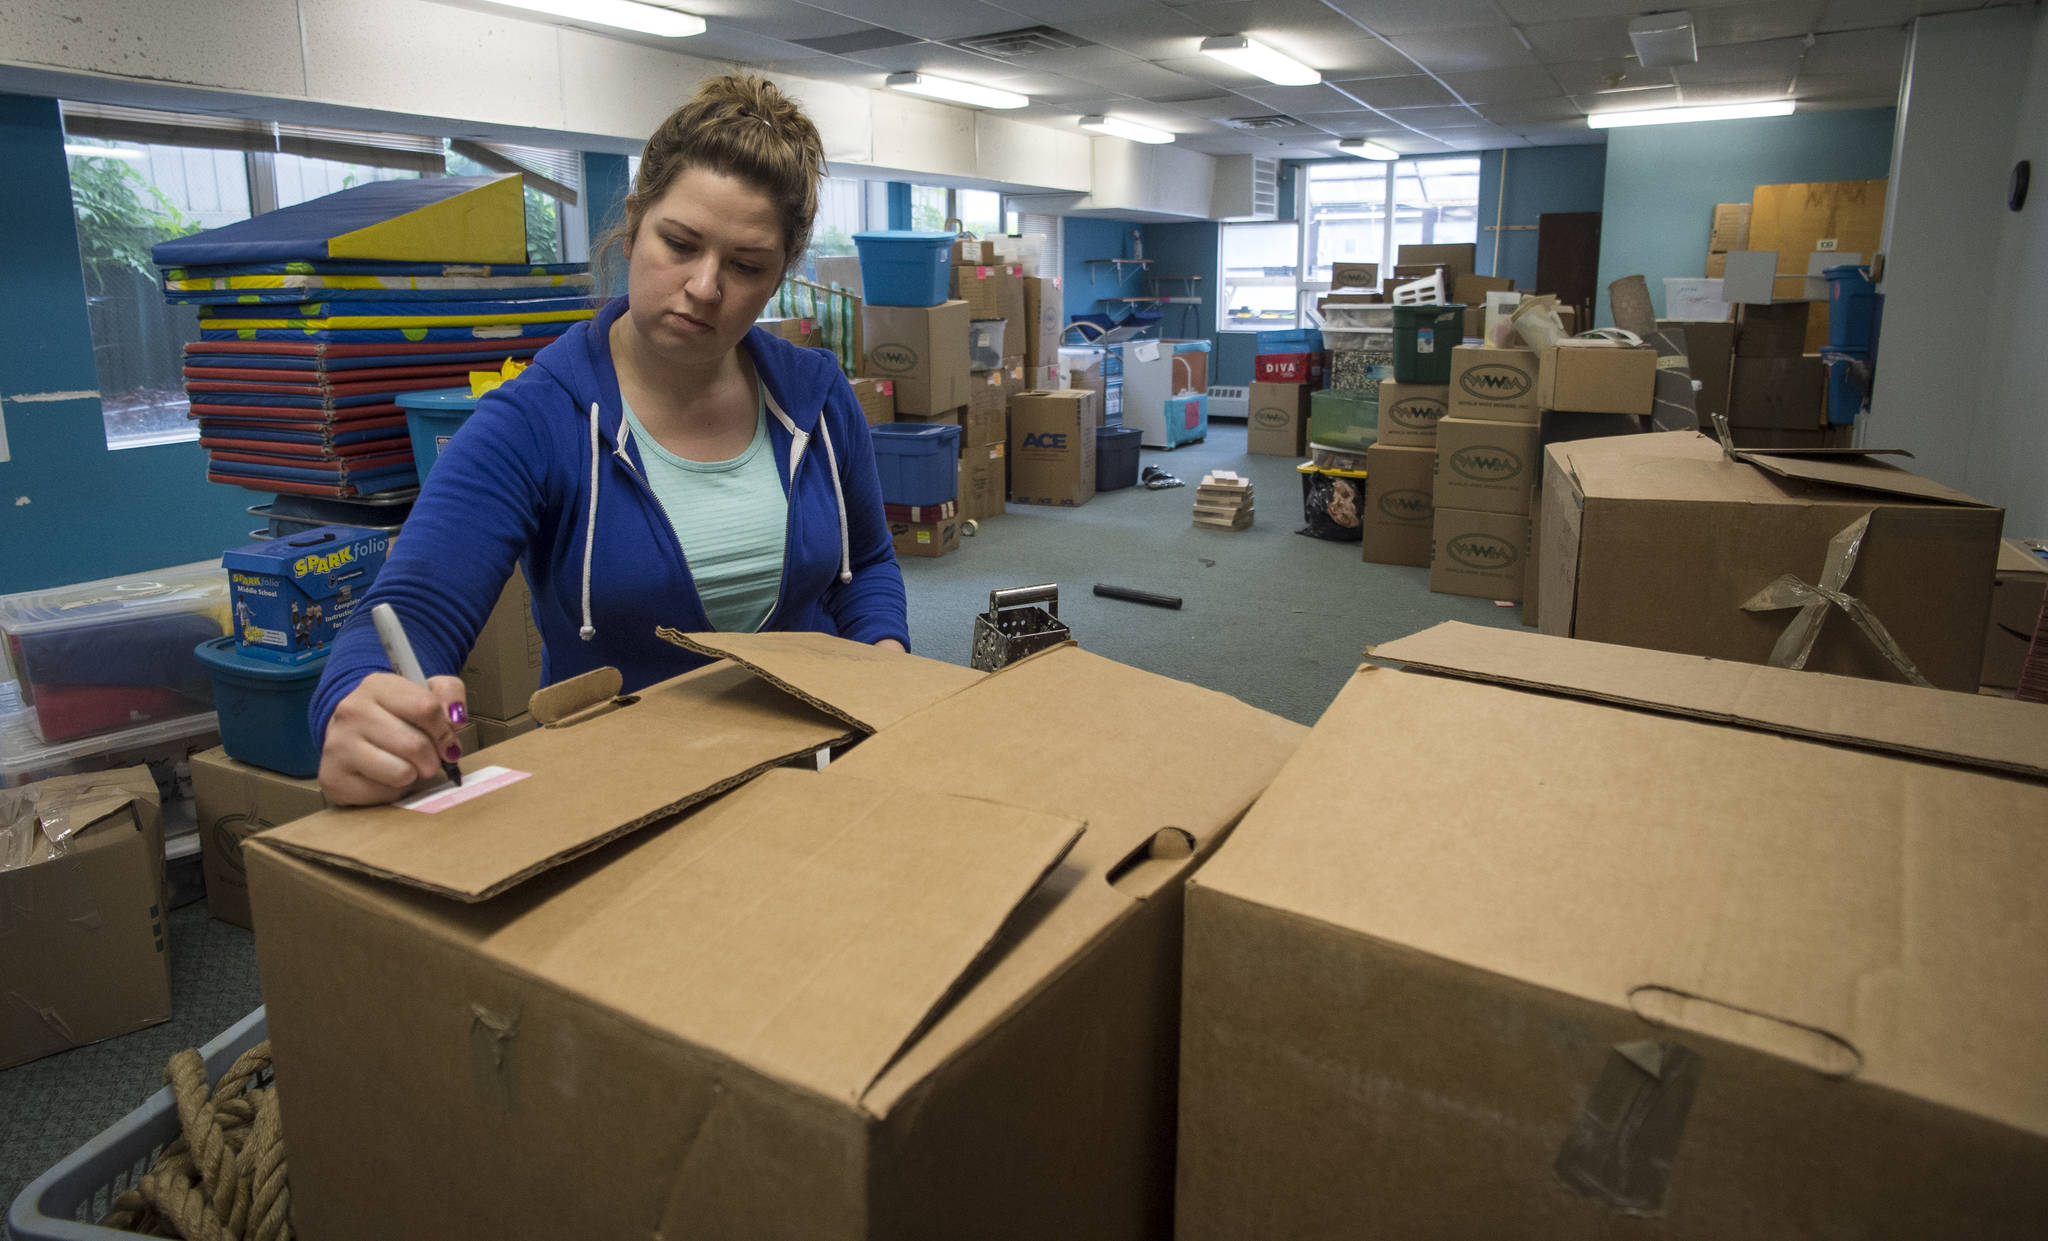 Teacher Lindsay Hulbert labels boxes on Monday, June 11, 2018, as the Juneau Community Charter School prepares to move out of the Arctic Corp building this summer. The school is moving into space at Juneau-Douglas High School. (Michael Penn | Juneau Empire)